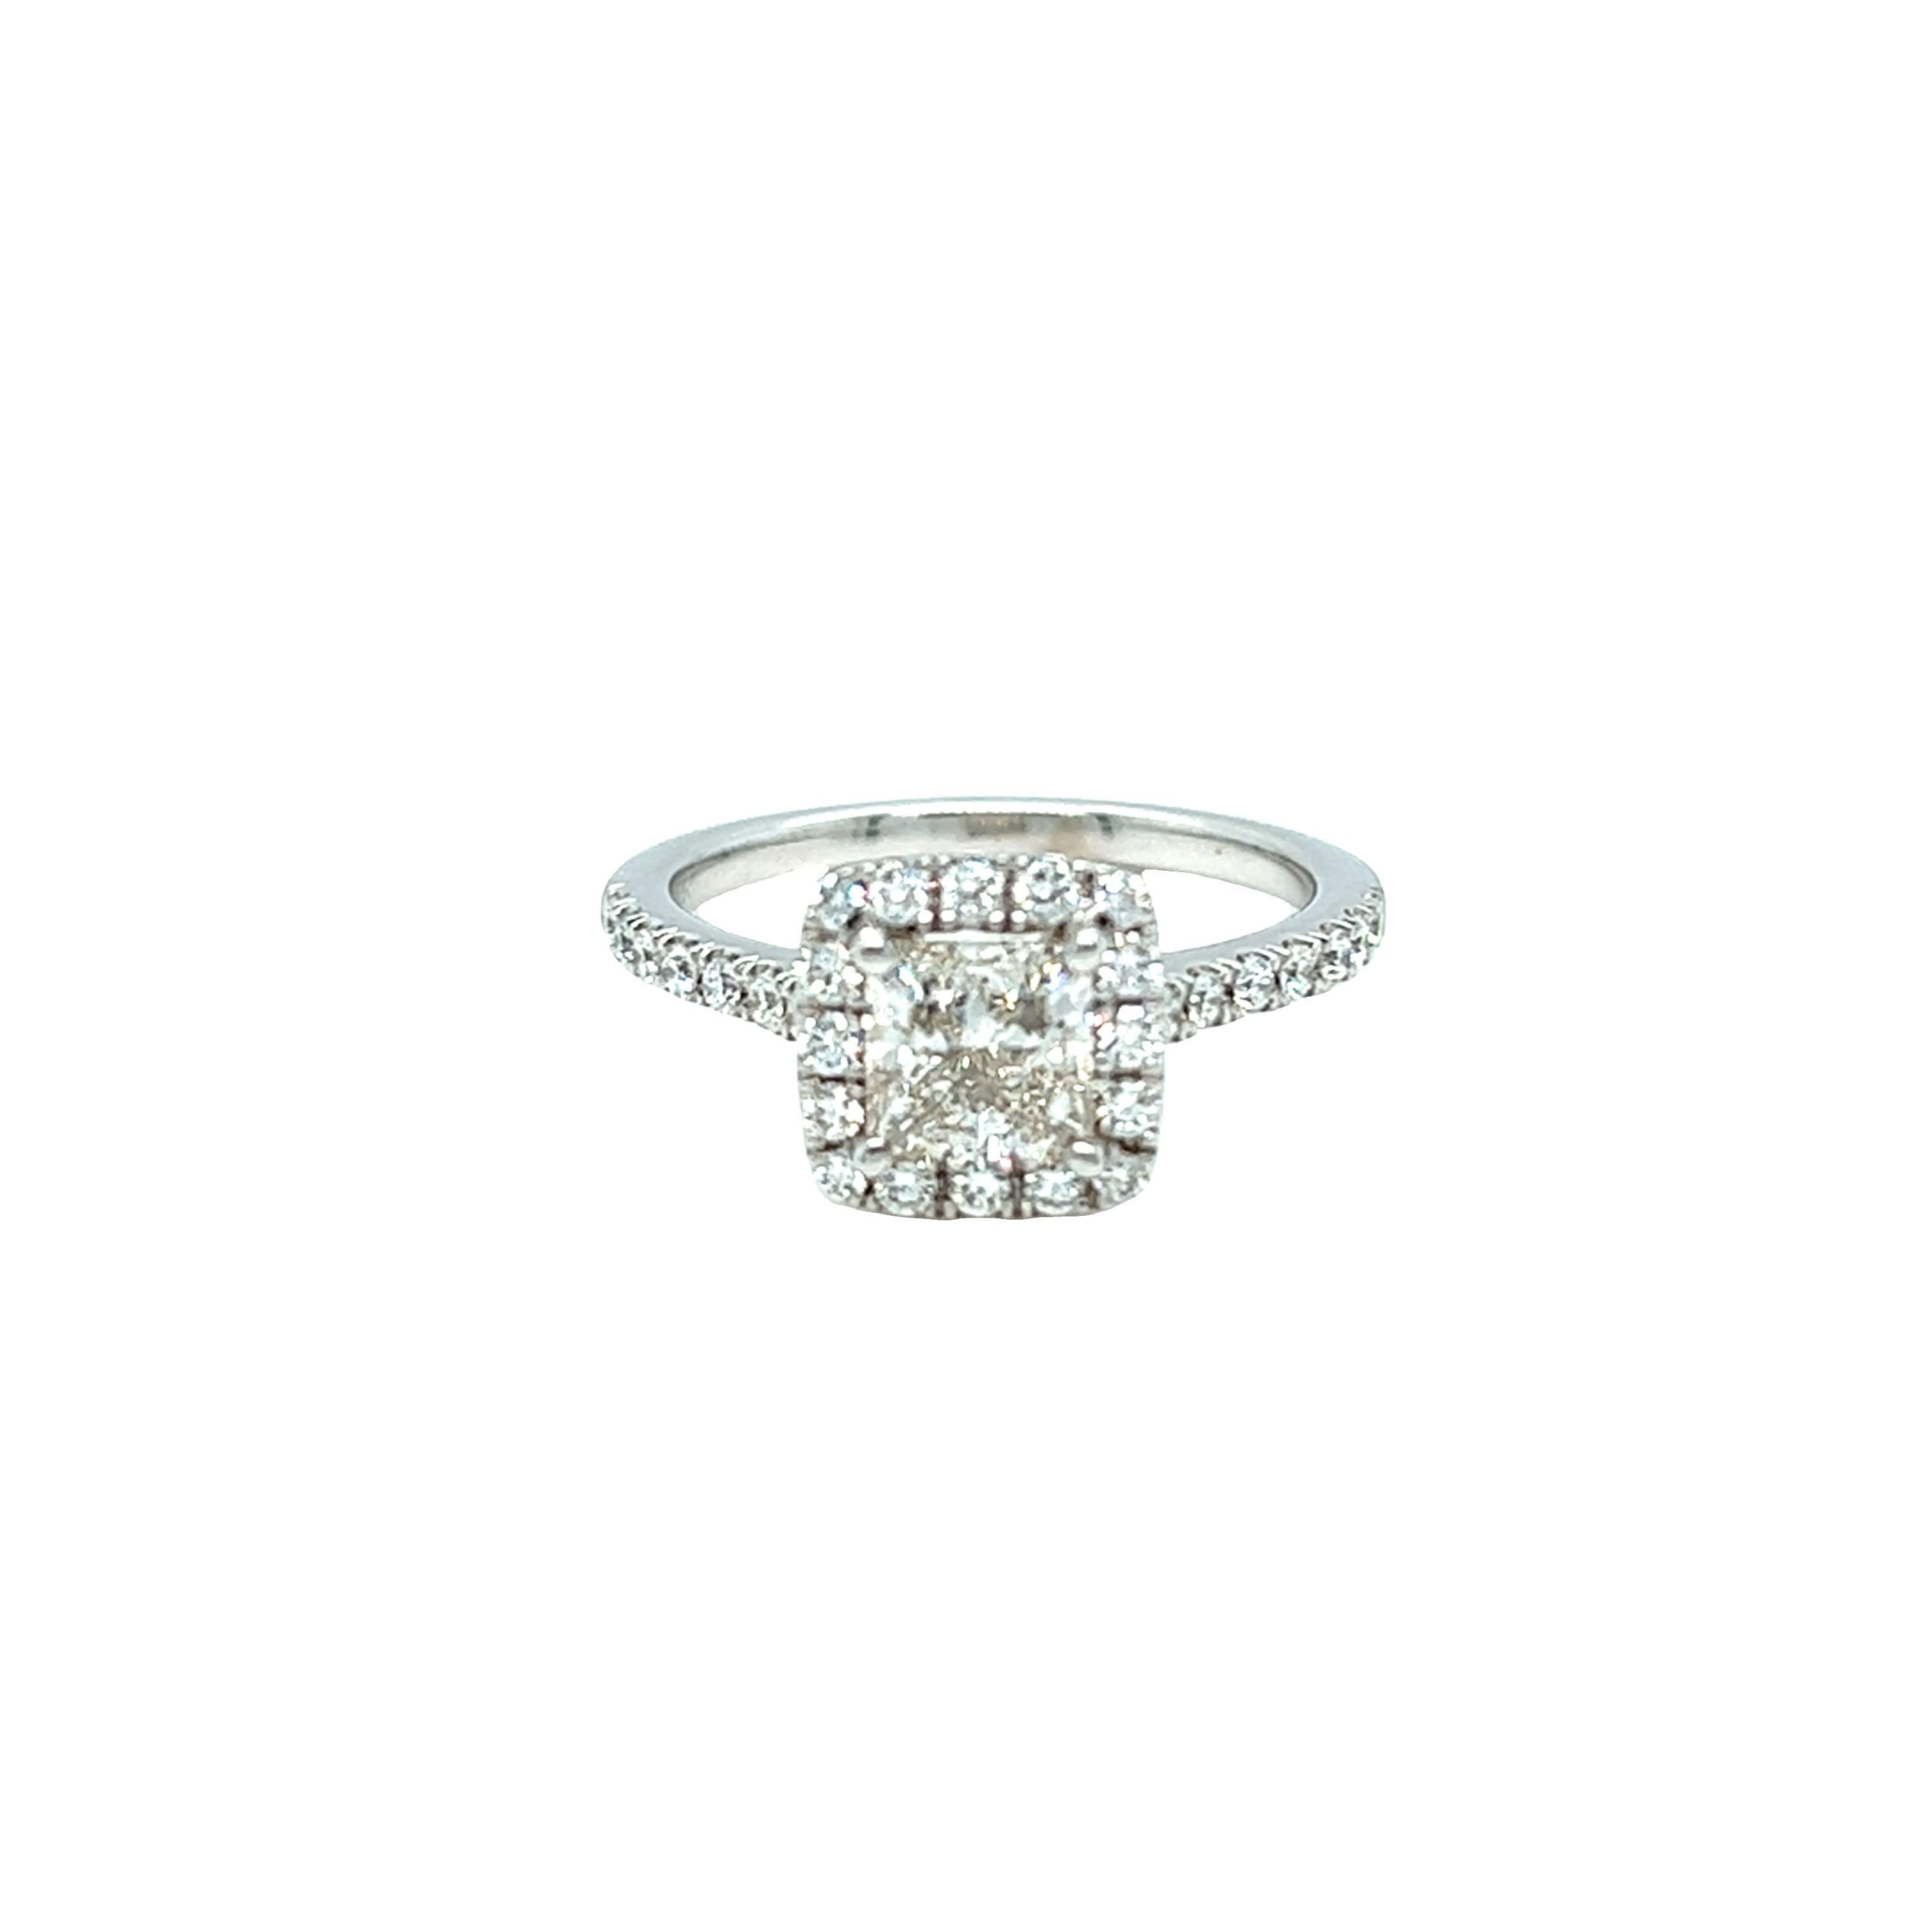 Modern classic diamond engagement ring showcases a princess cut diamond weighing approximately 0.90 carat, H-I color, and VS clarity. Small near colorless diamonds dress up the center stone and continues the glitter down the band. The total weight